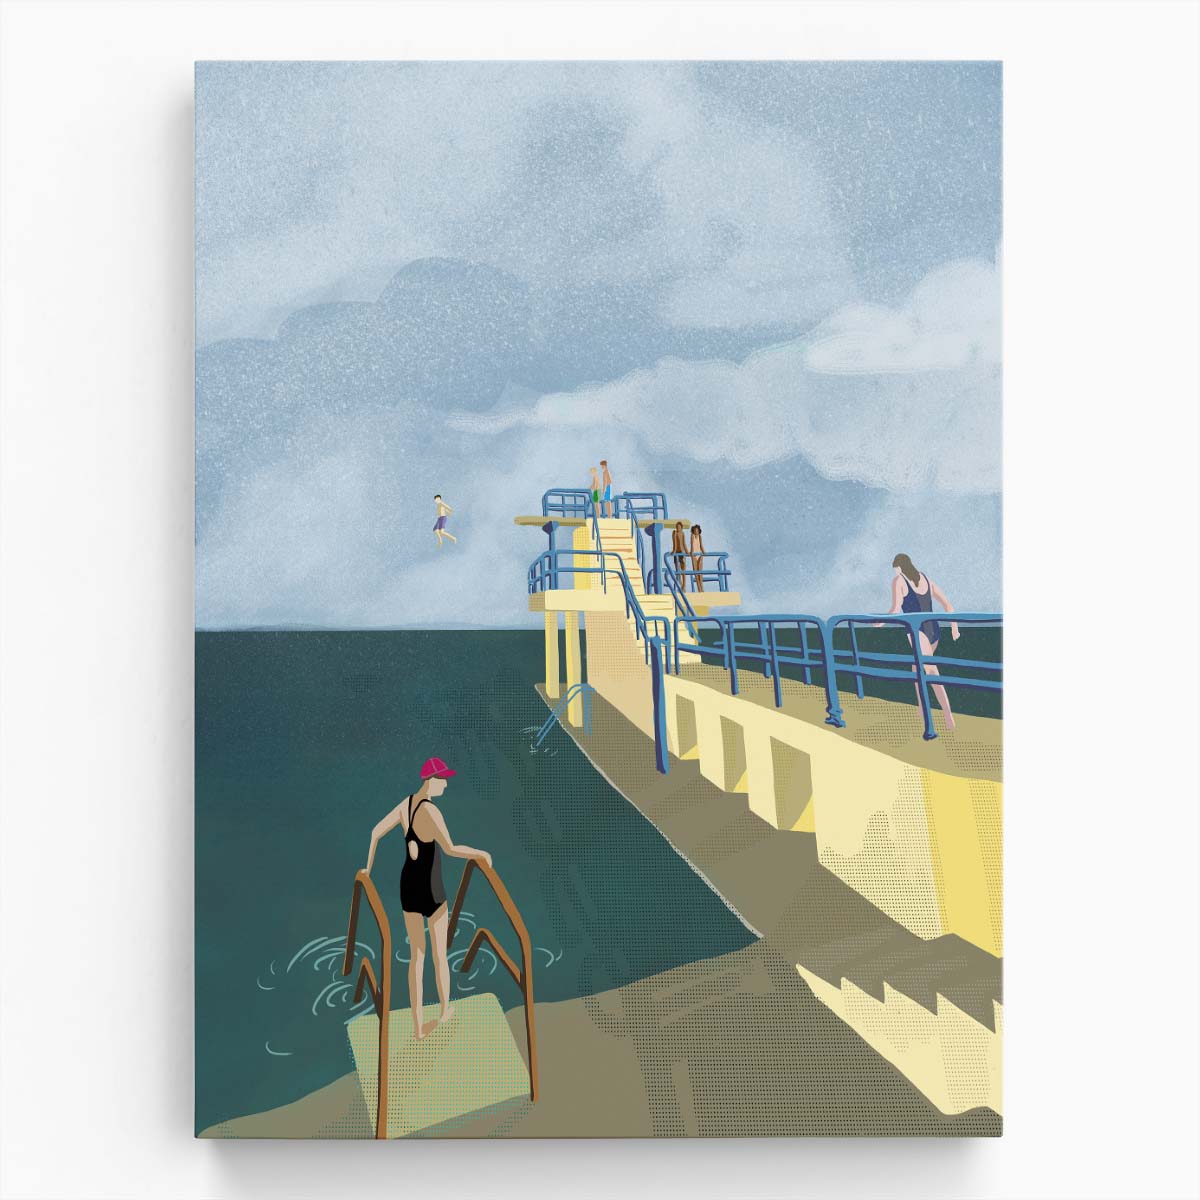 Irish Landscape Illustration Blackrock Diving Tower in Salthill, Galway by Luxuriance Designs, made in USA